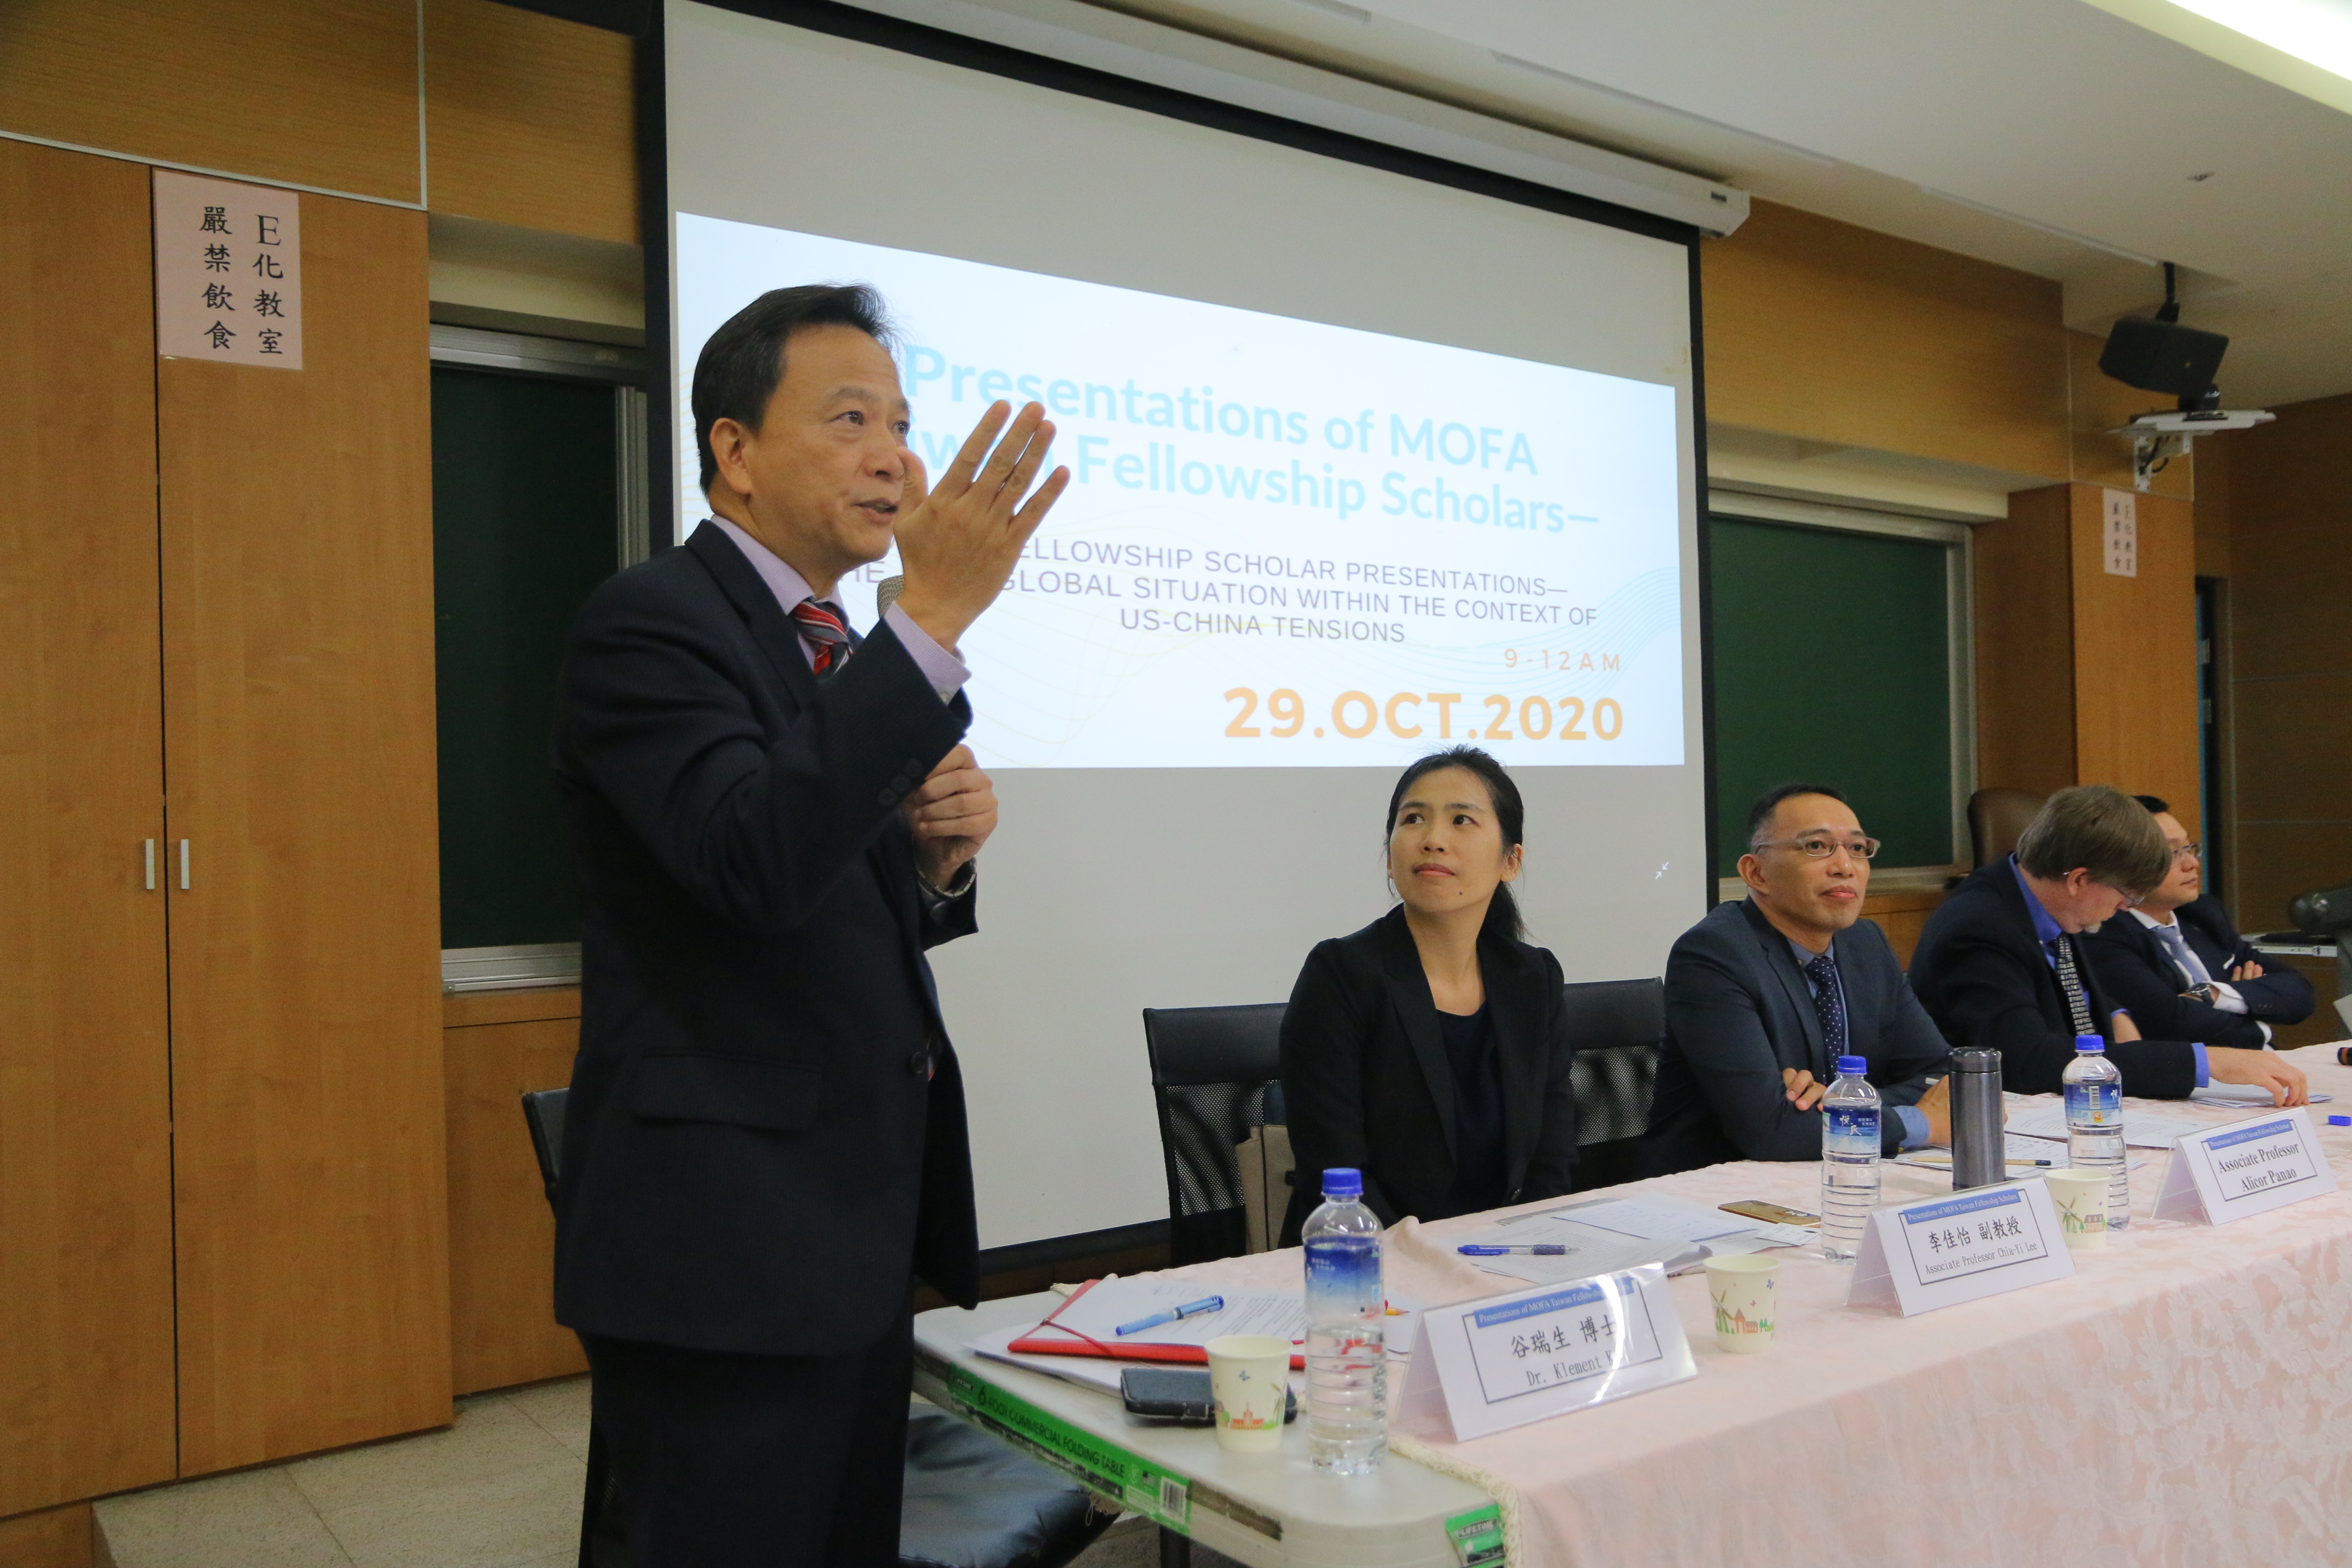 2020 Presentations of MOFA Taiwan Fellowship Scholars—The New Global Situation within the Context of US-China Tensions:picture3